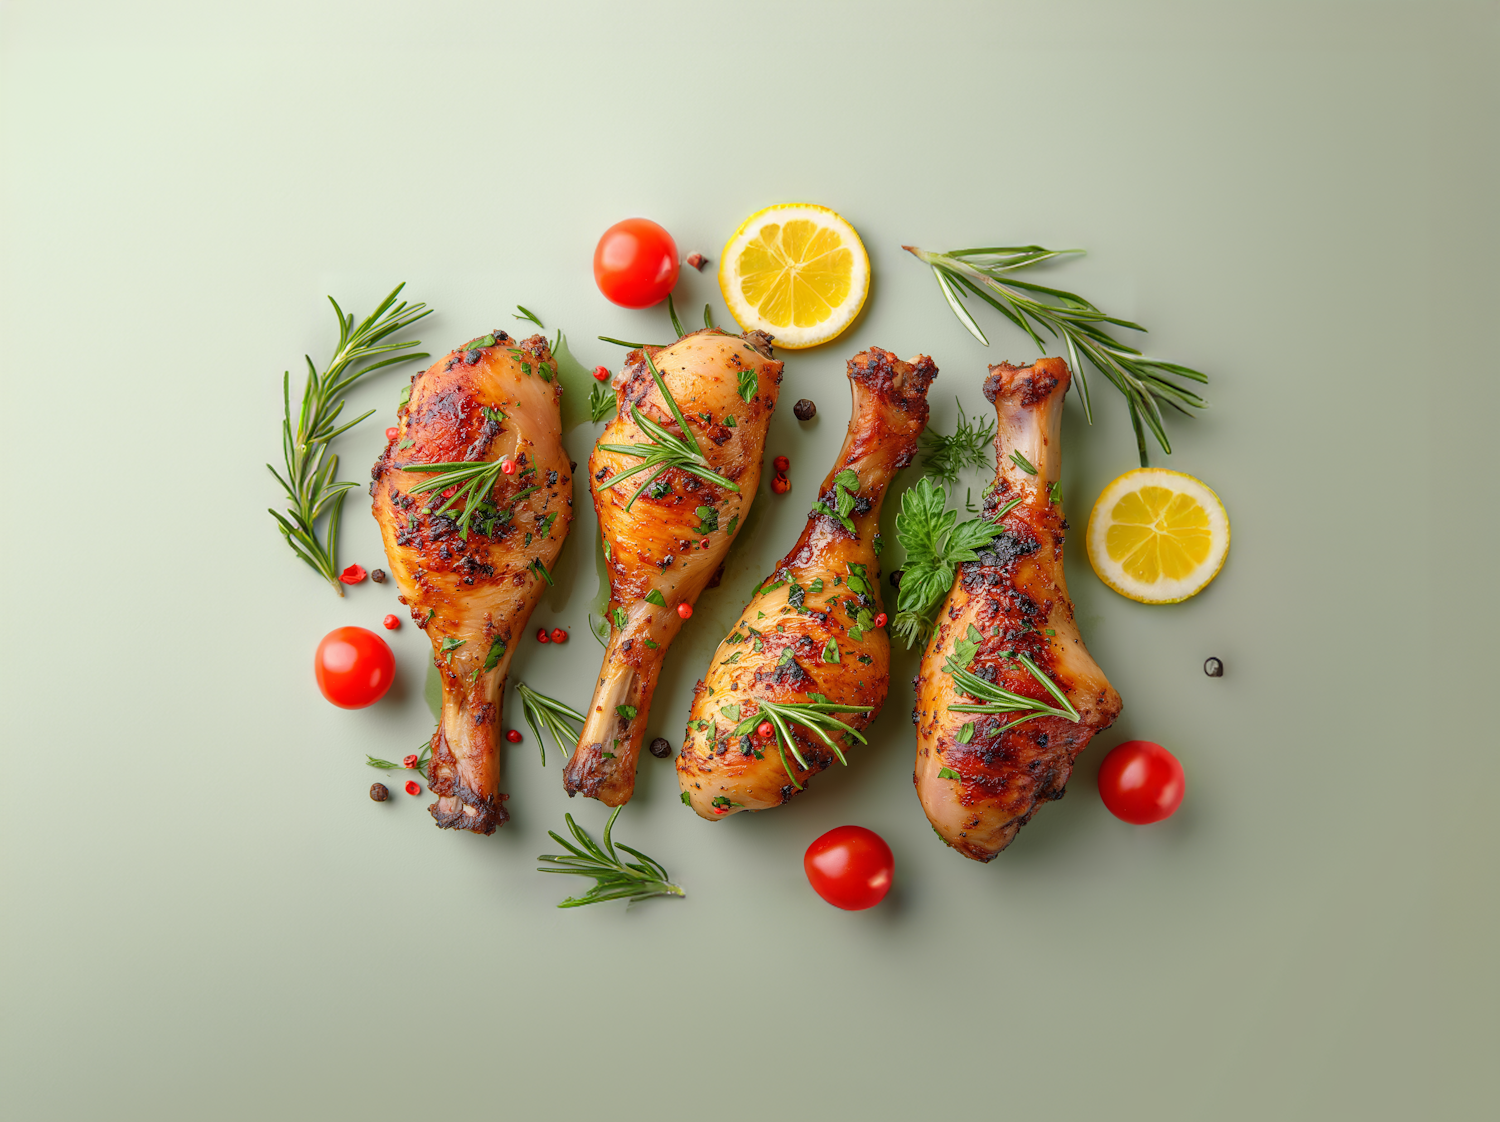 Culinary Arrangement with Roasted Chicken Drumsticks